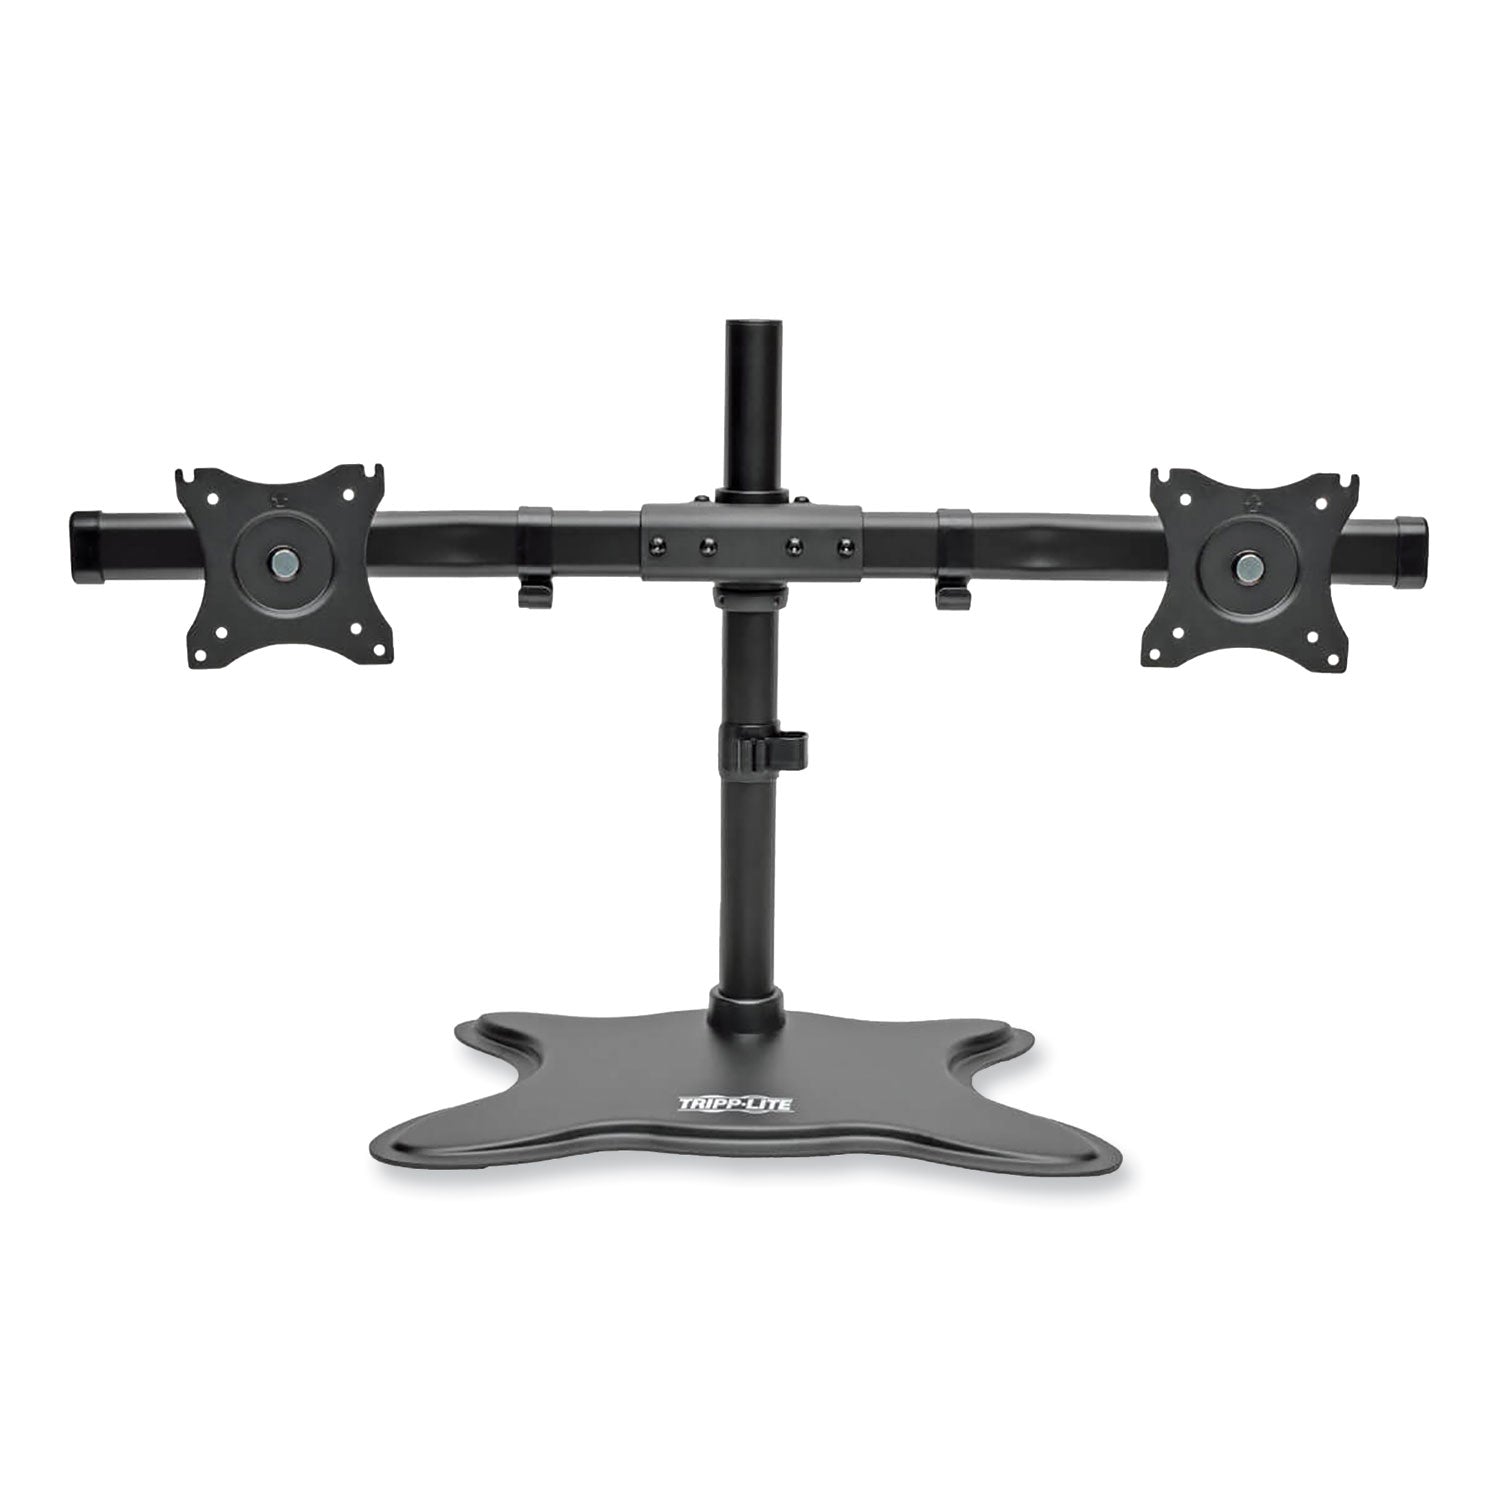 dual-desktop-monitor-stand-for-13-to-27-monitors-3169-x-10-x-1811-black-supports-26-lb_trpddr1327sdd - 4